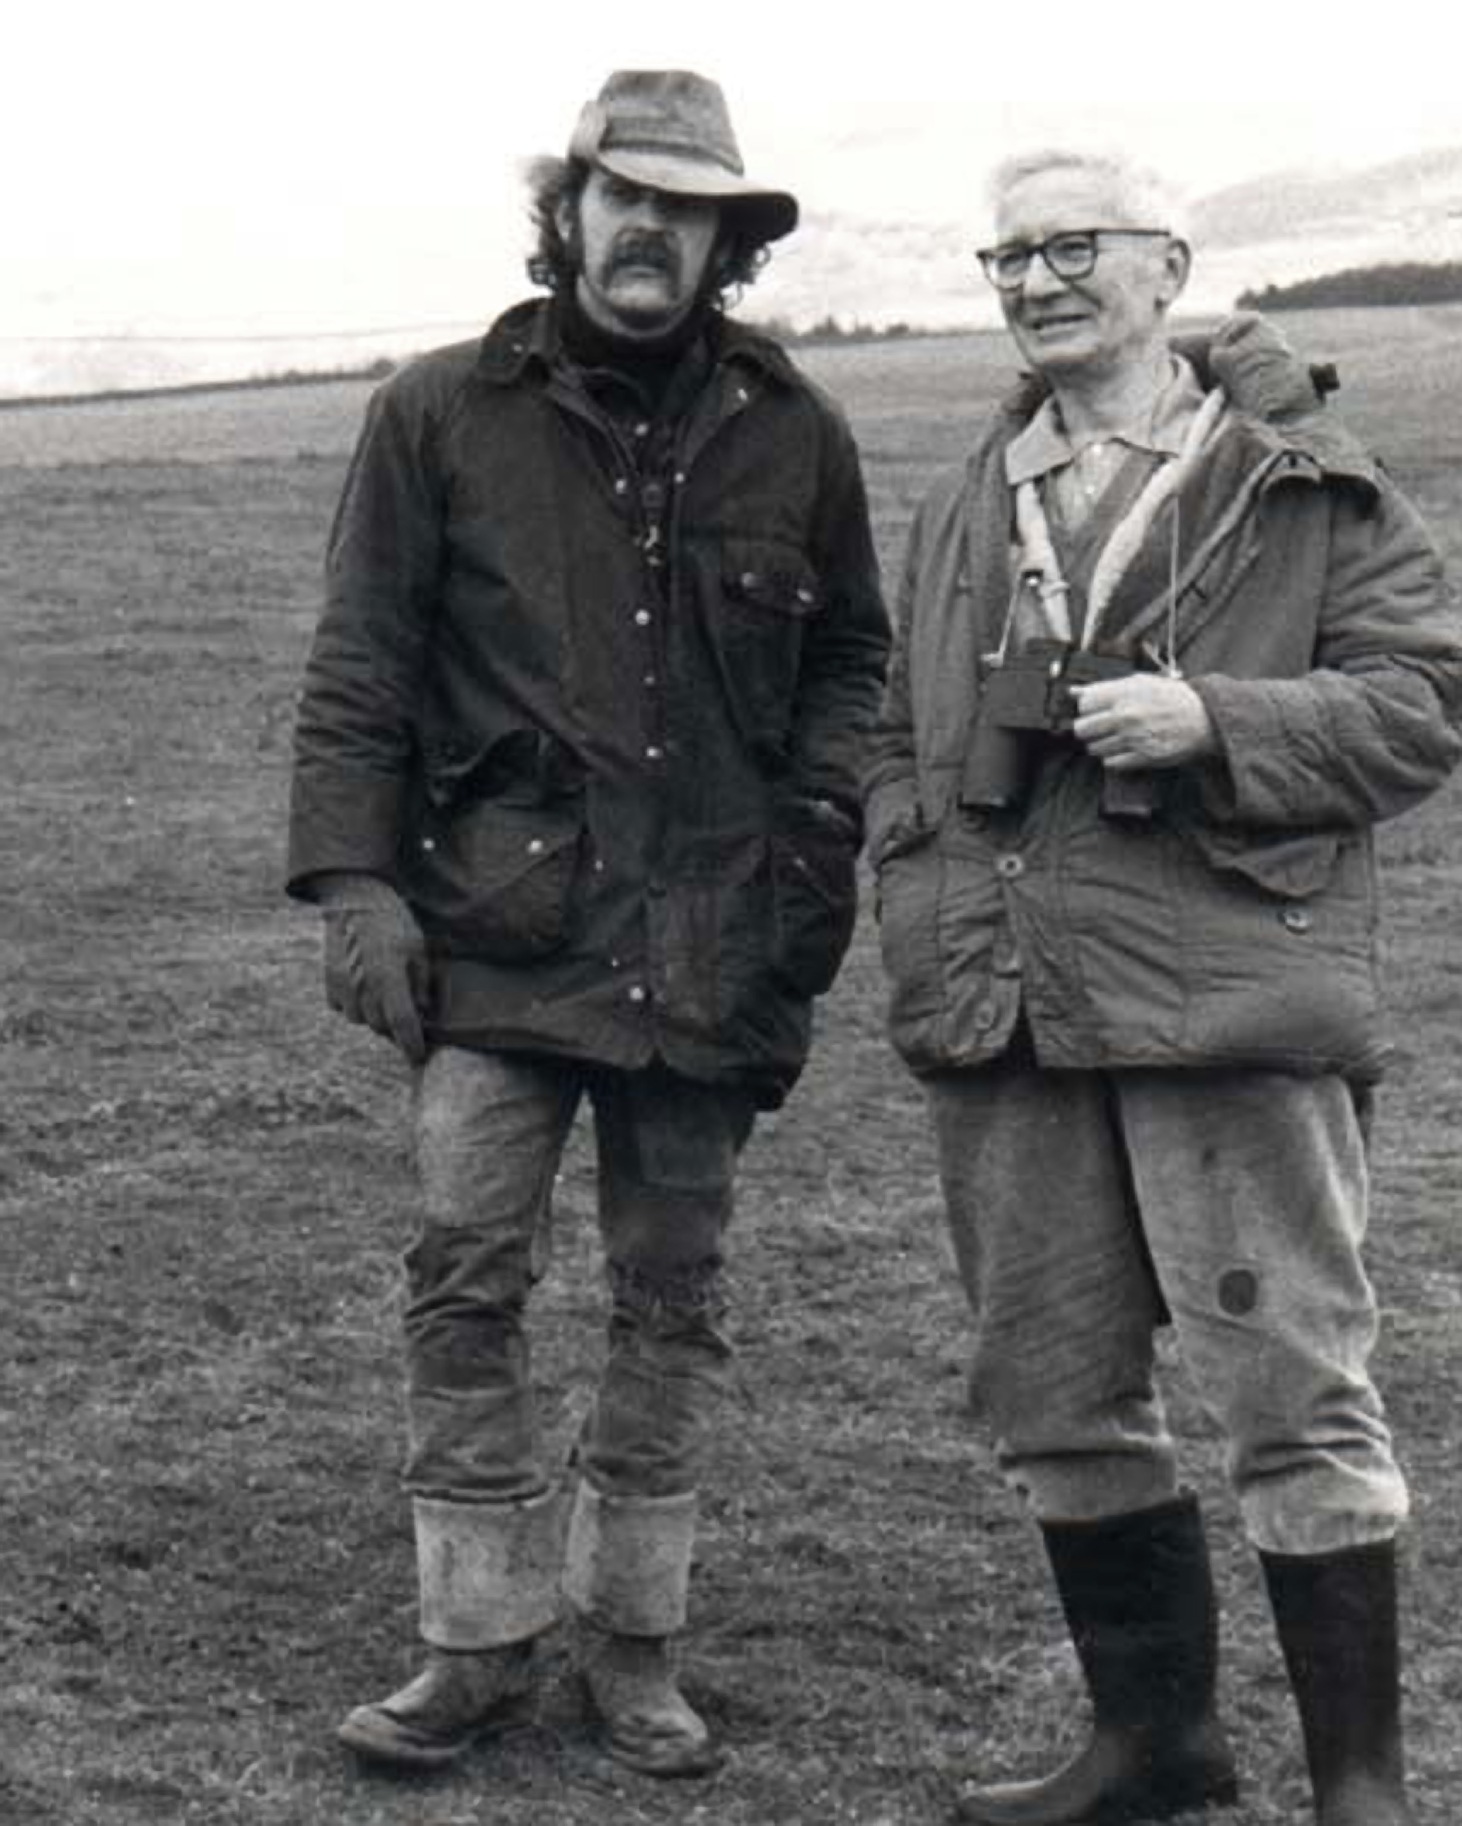 Tinbergen, wearing outdoor clothes and with binoculars around his neck, is standing in a rural landscape with a companion